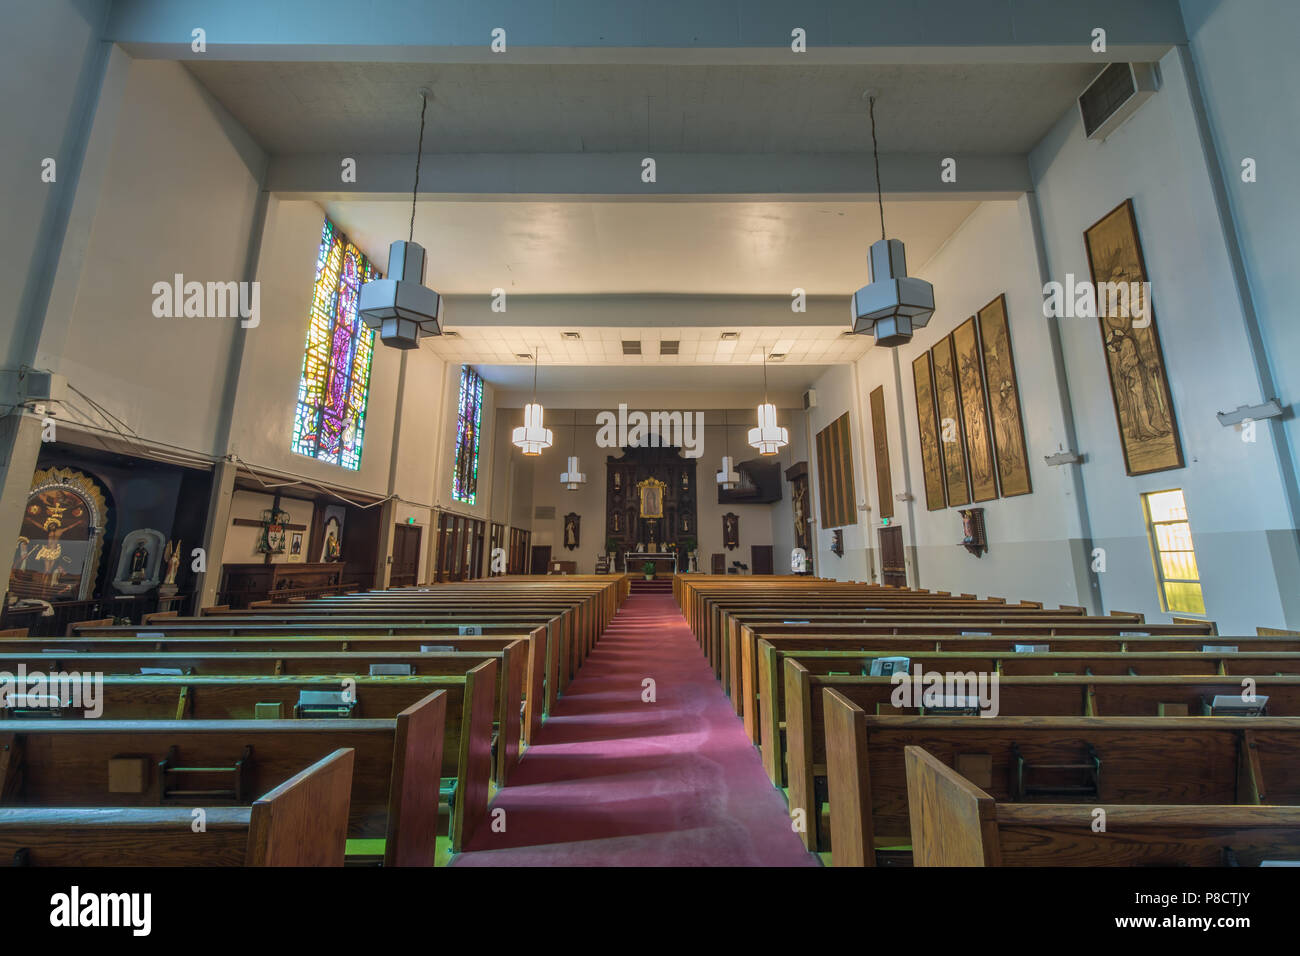 Sacramento, California - July 6, 2018: Interiors of Our Lady of Guadalupe  Church Stock Photo